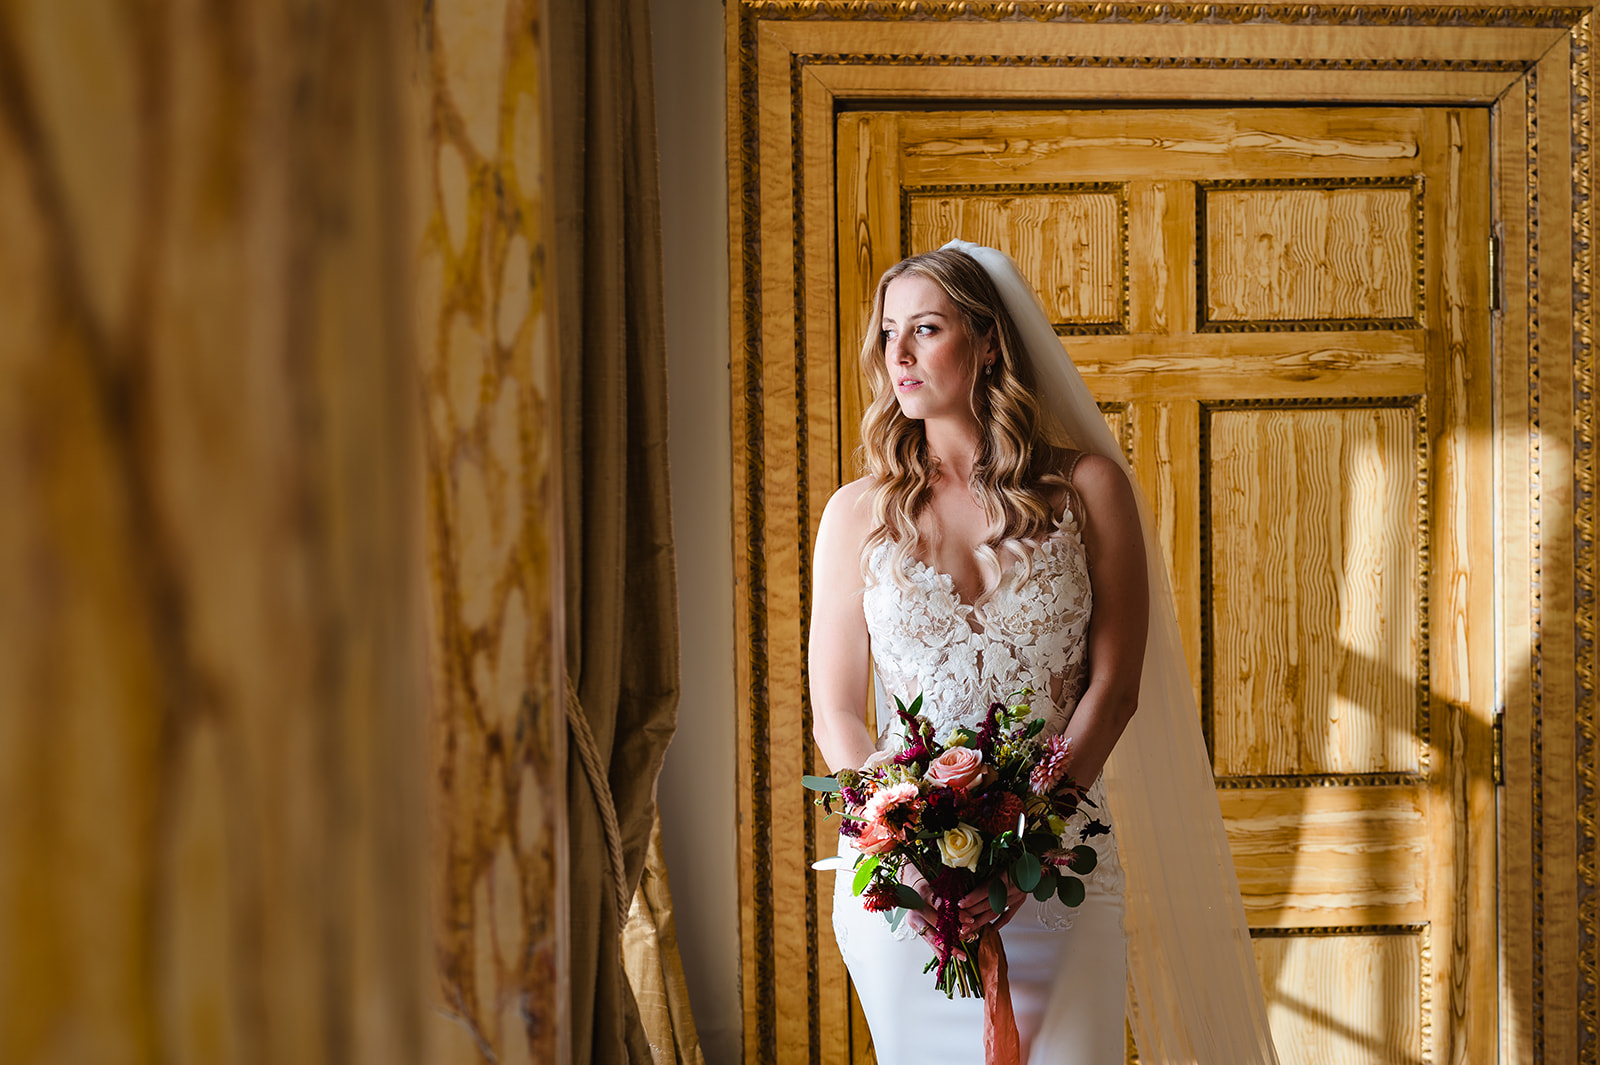 Brid e with her bright wedding bouquet looking out the window at Gosfield hall